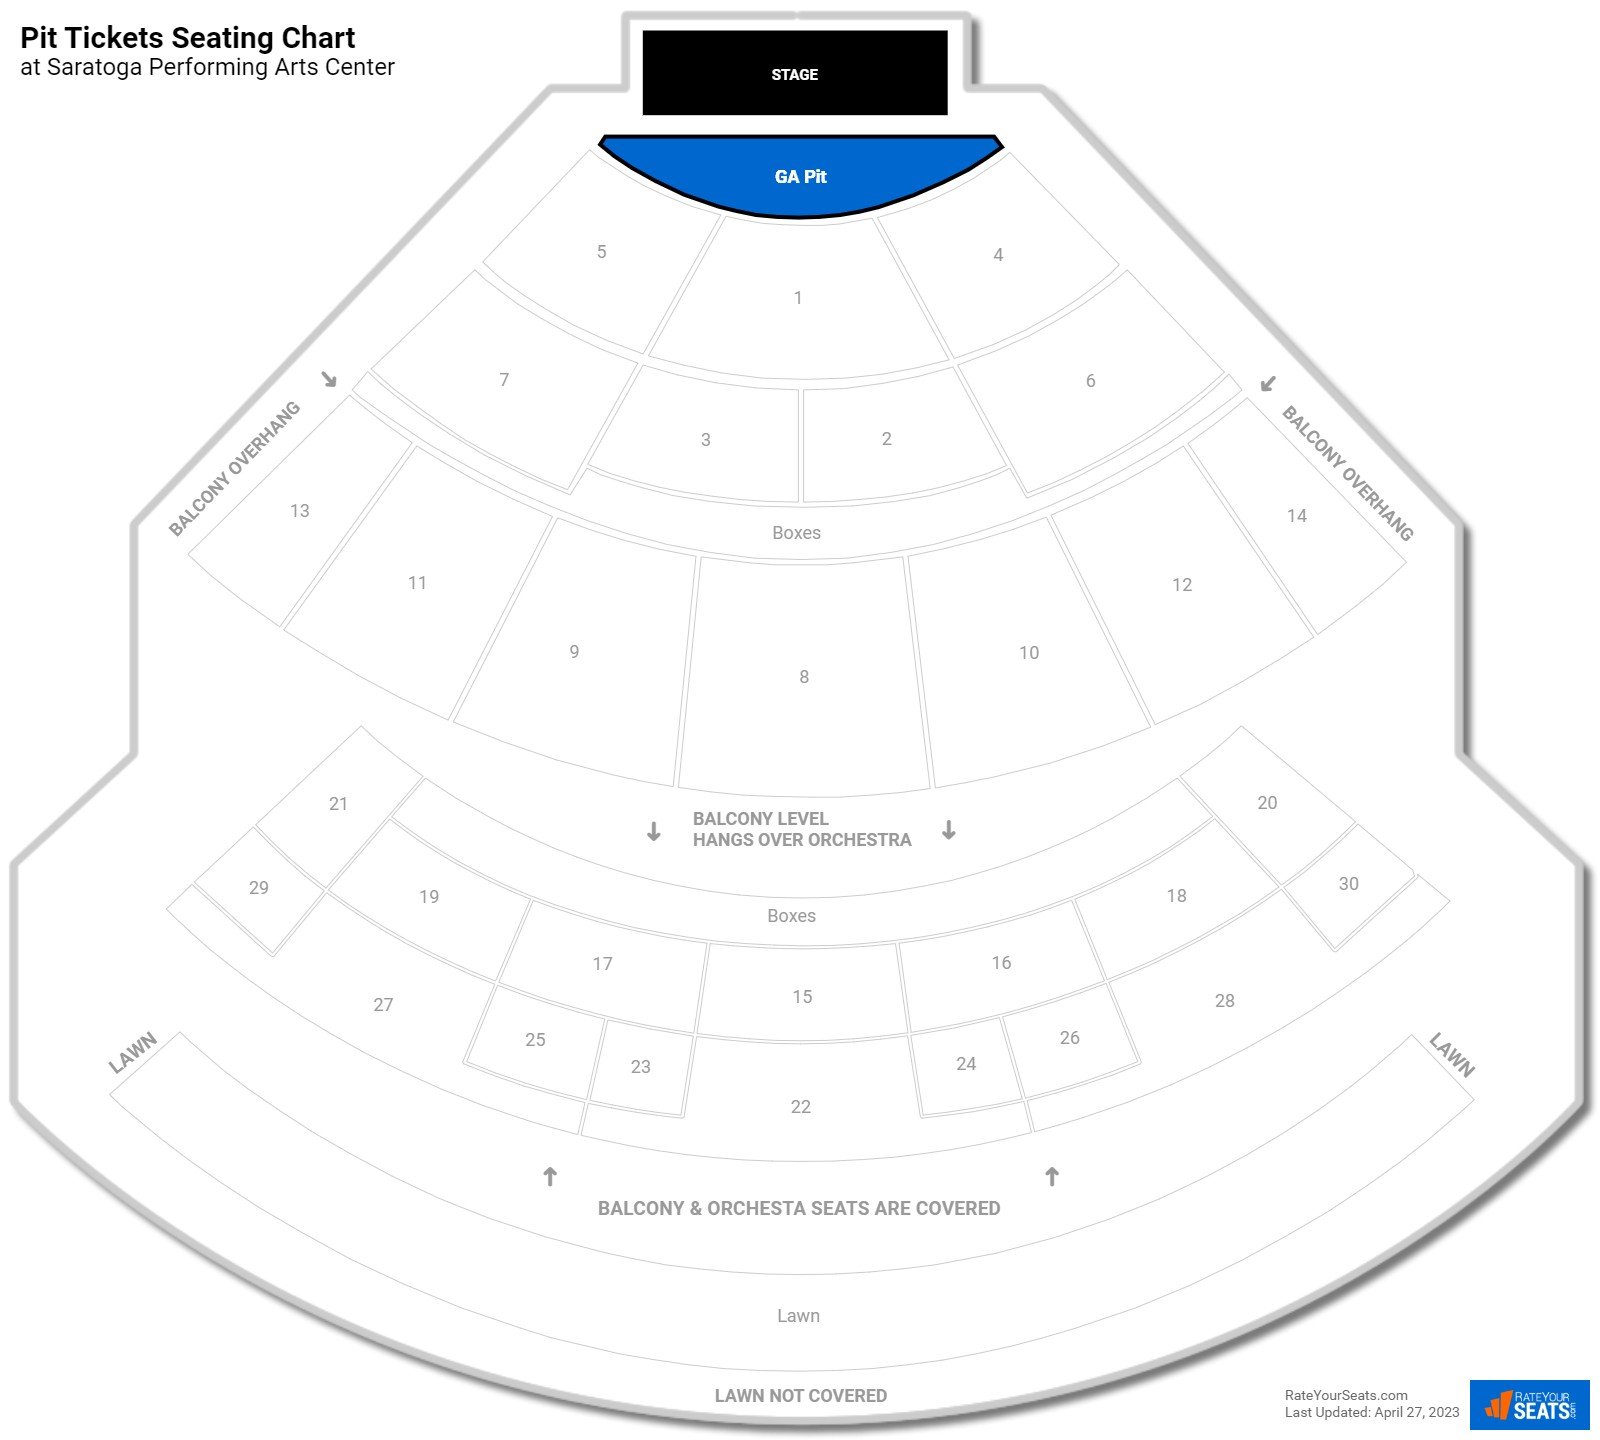 Concert Pit Tickets Seating Chart at Saratoga Performing Arts Center